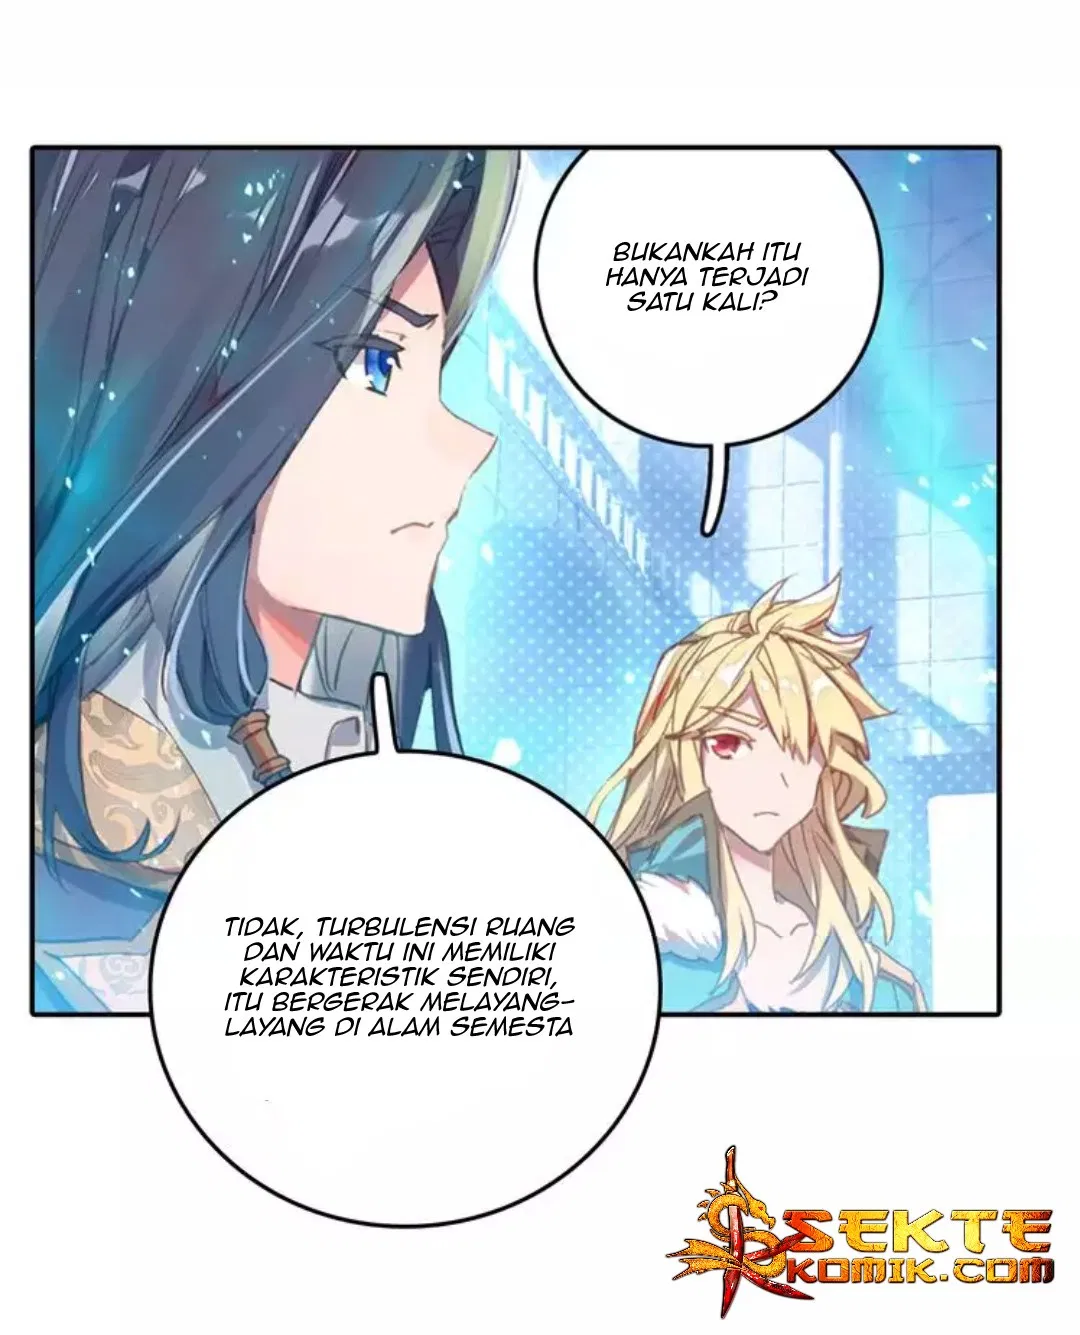 Soul Land Legend of the Tang’s Hero Chapter 02